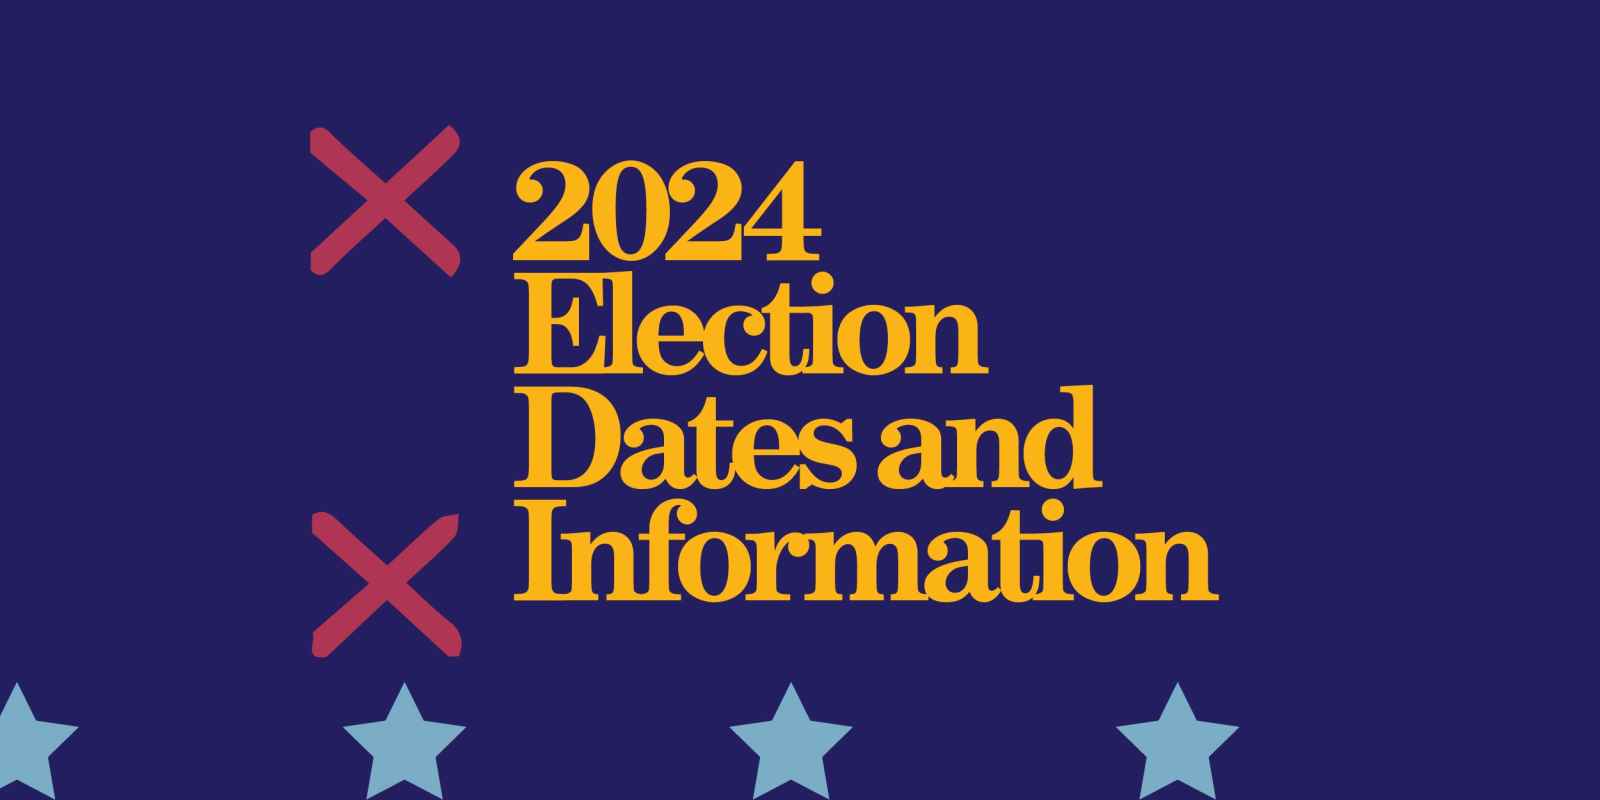 Navy background. Yellow text "2024 Election Dates and Information"